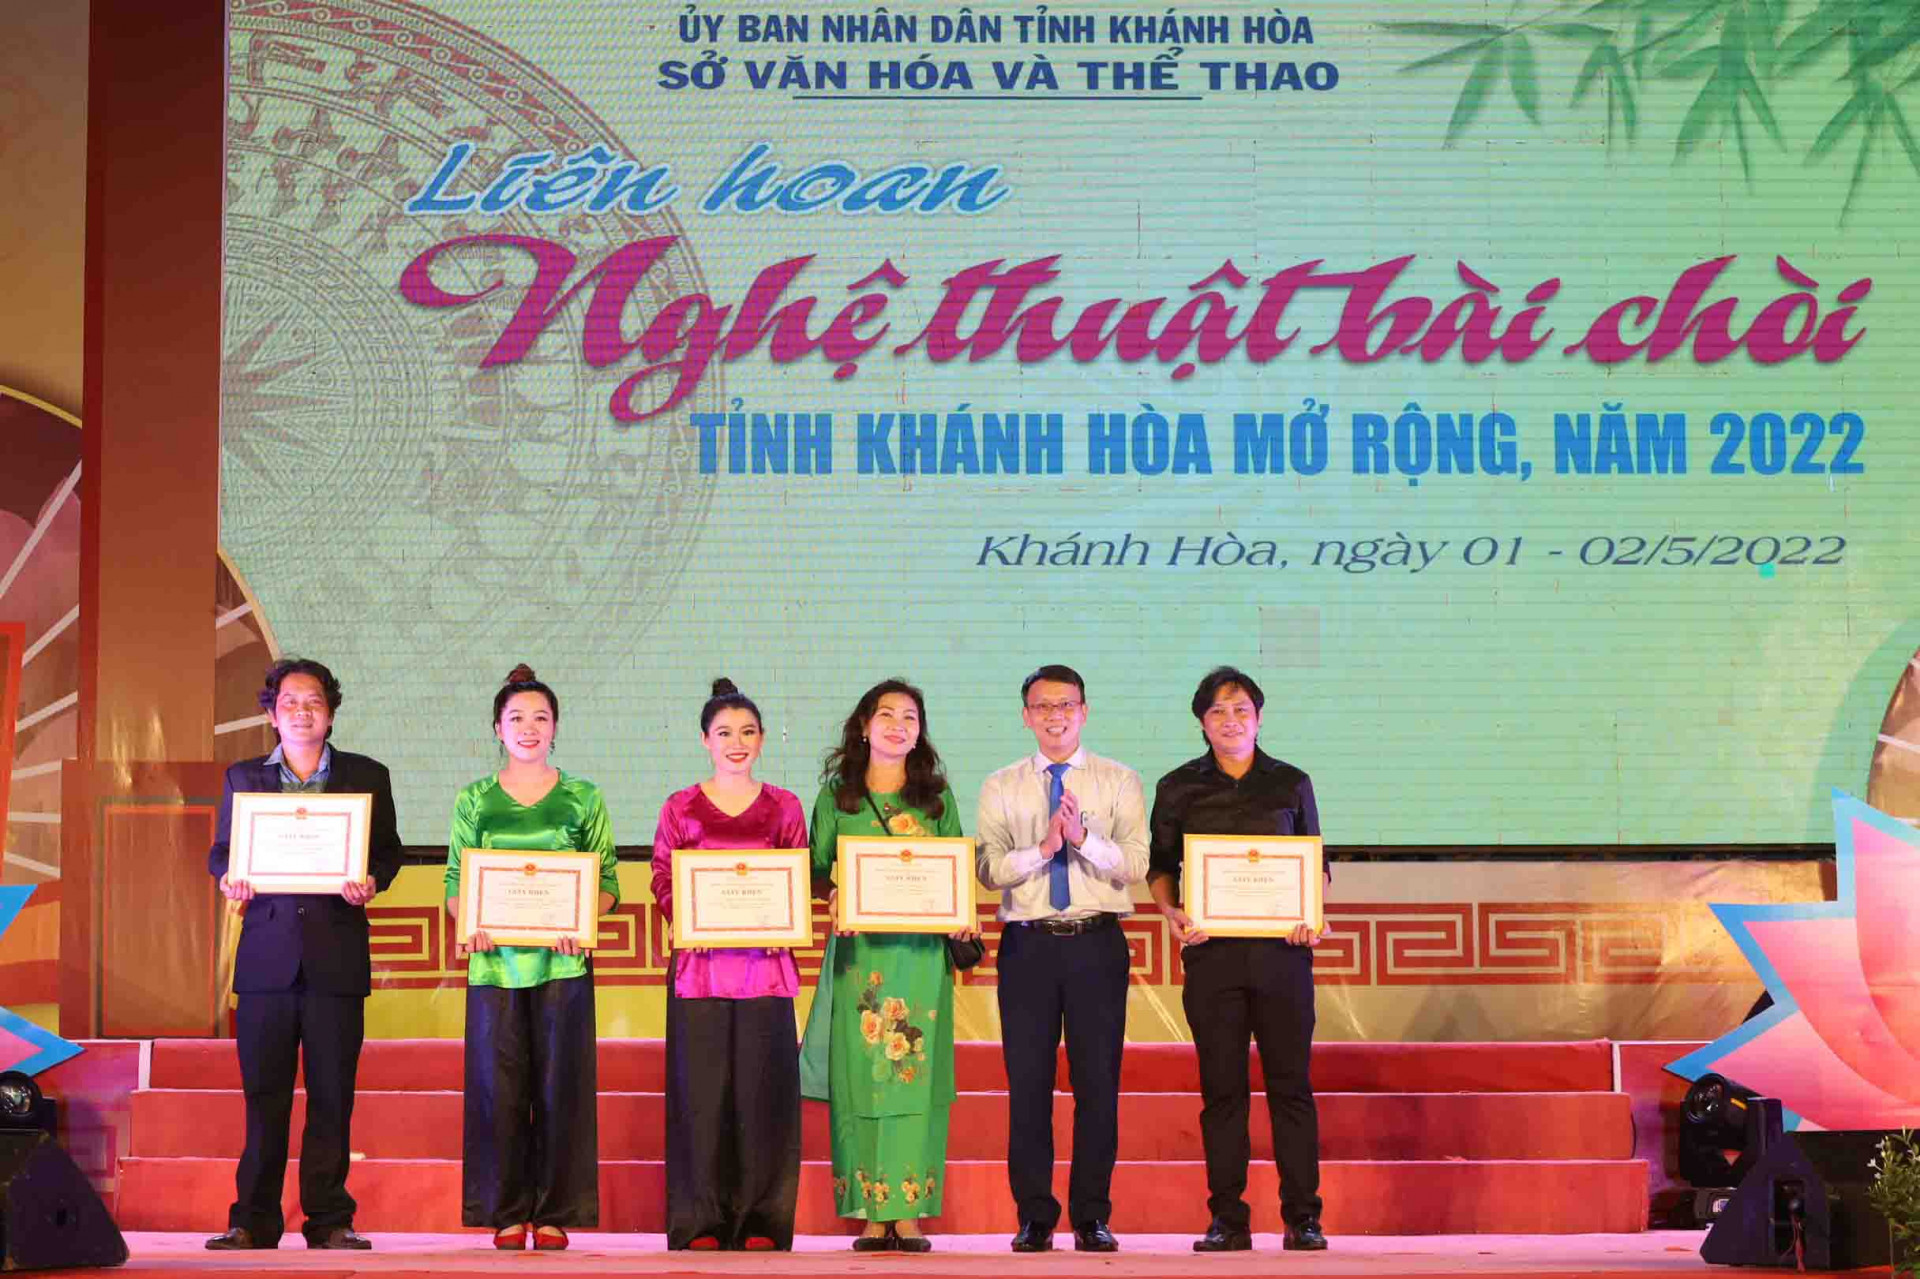 Leadership of Khanh Hoa Provincial Department of Culture and Sports giving certificates of merit to Khanh Hoa’s Bai Choi delegations